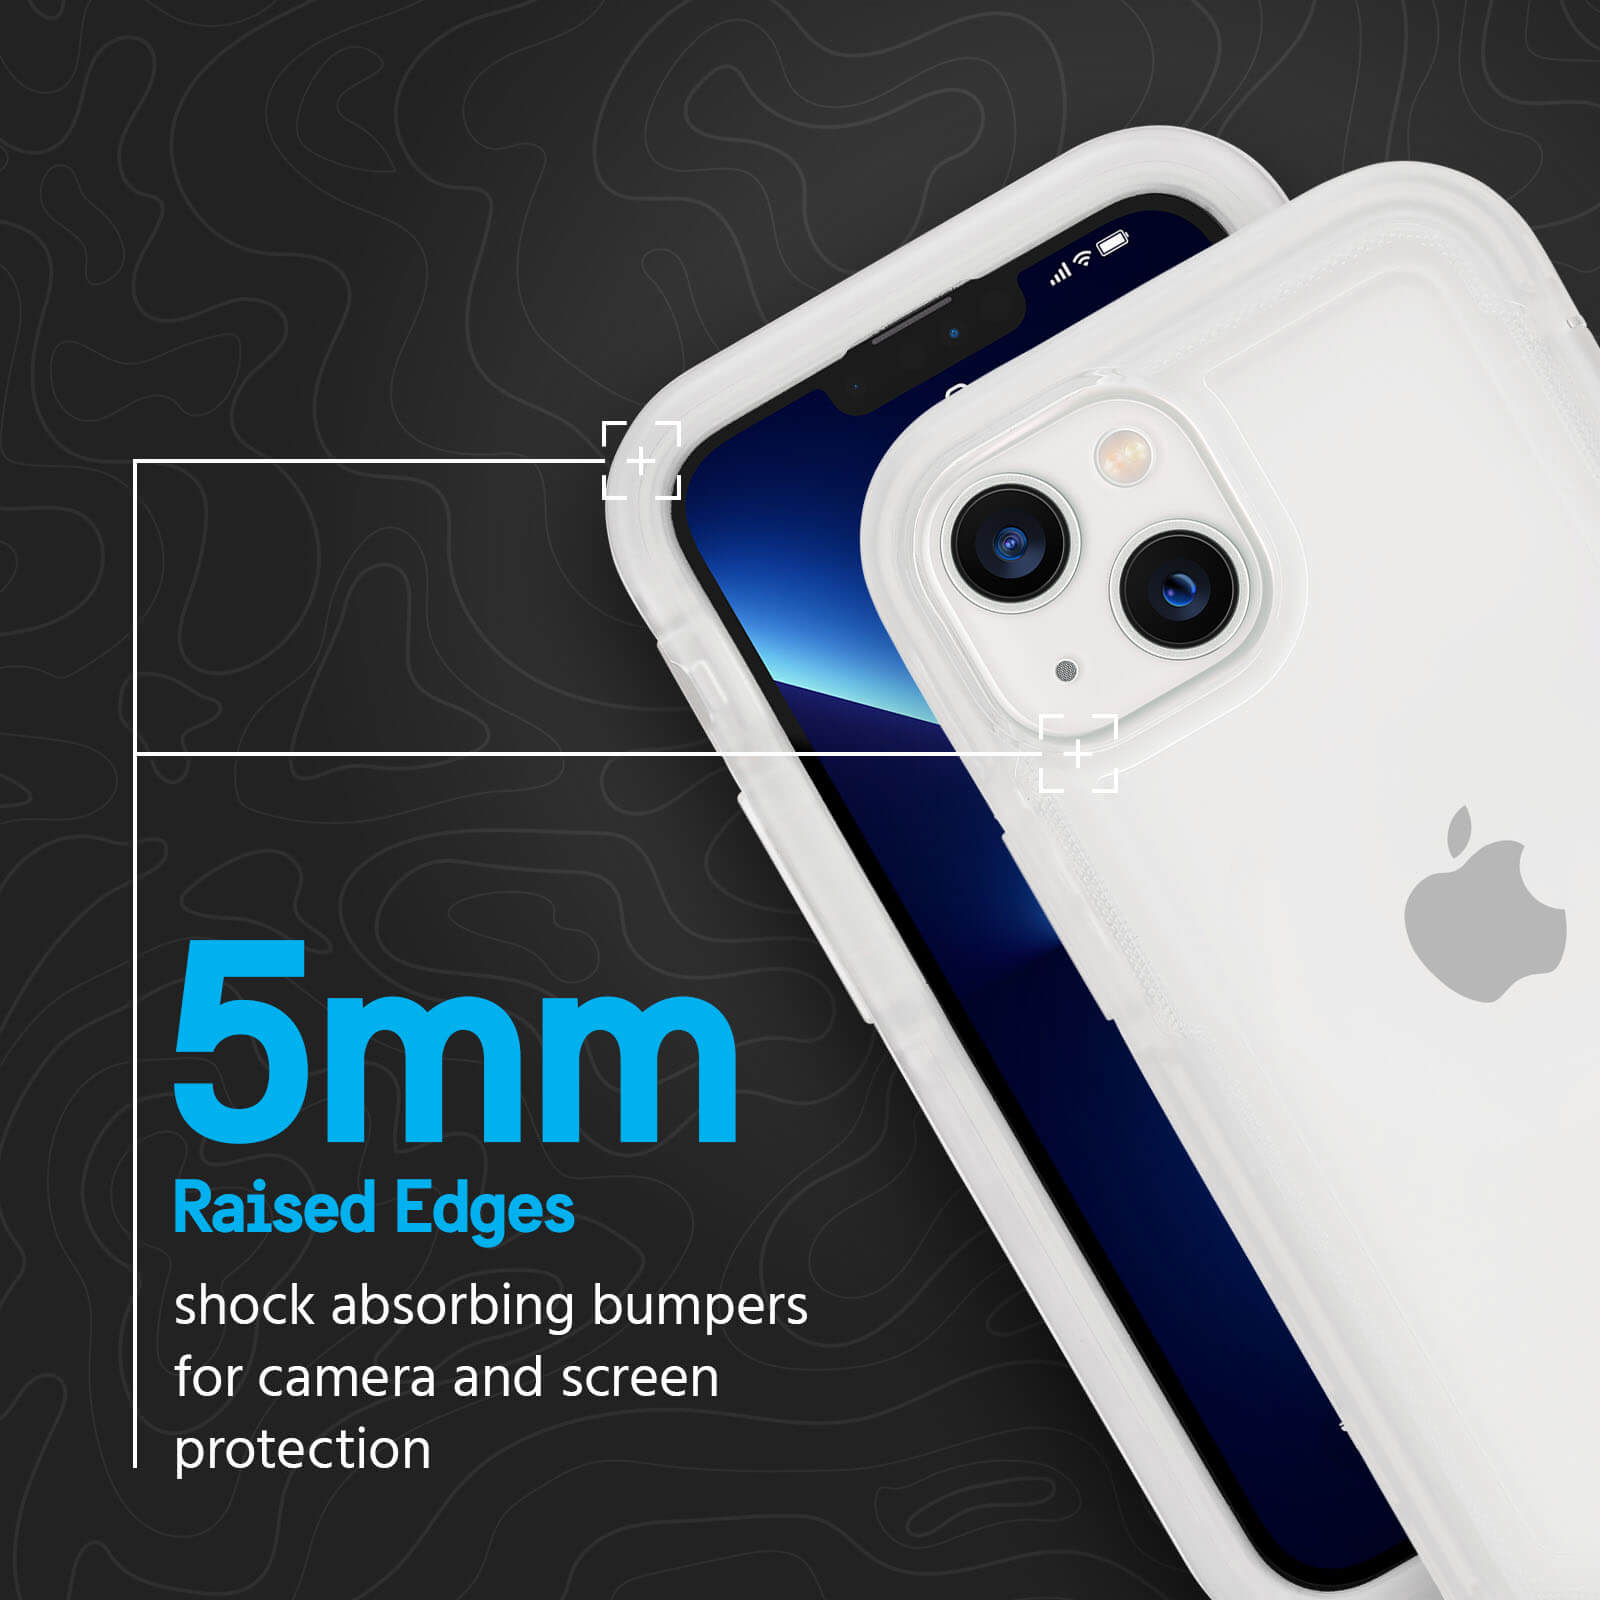 5mm raised edges. shock absorbing bumpers for camera and screen protection. color::Clear